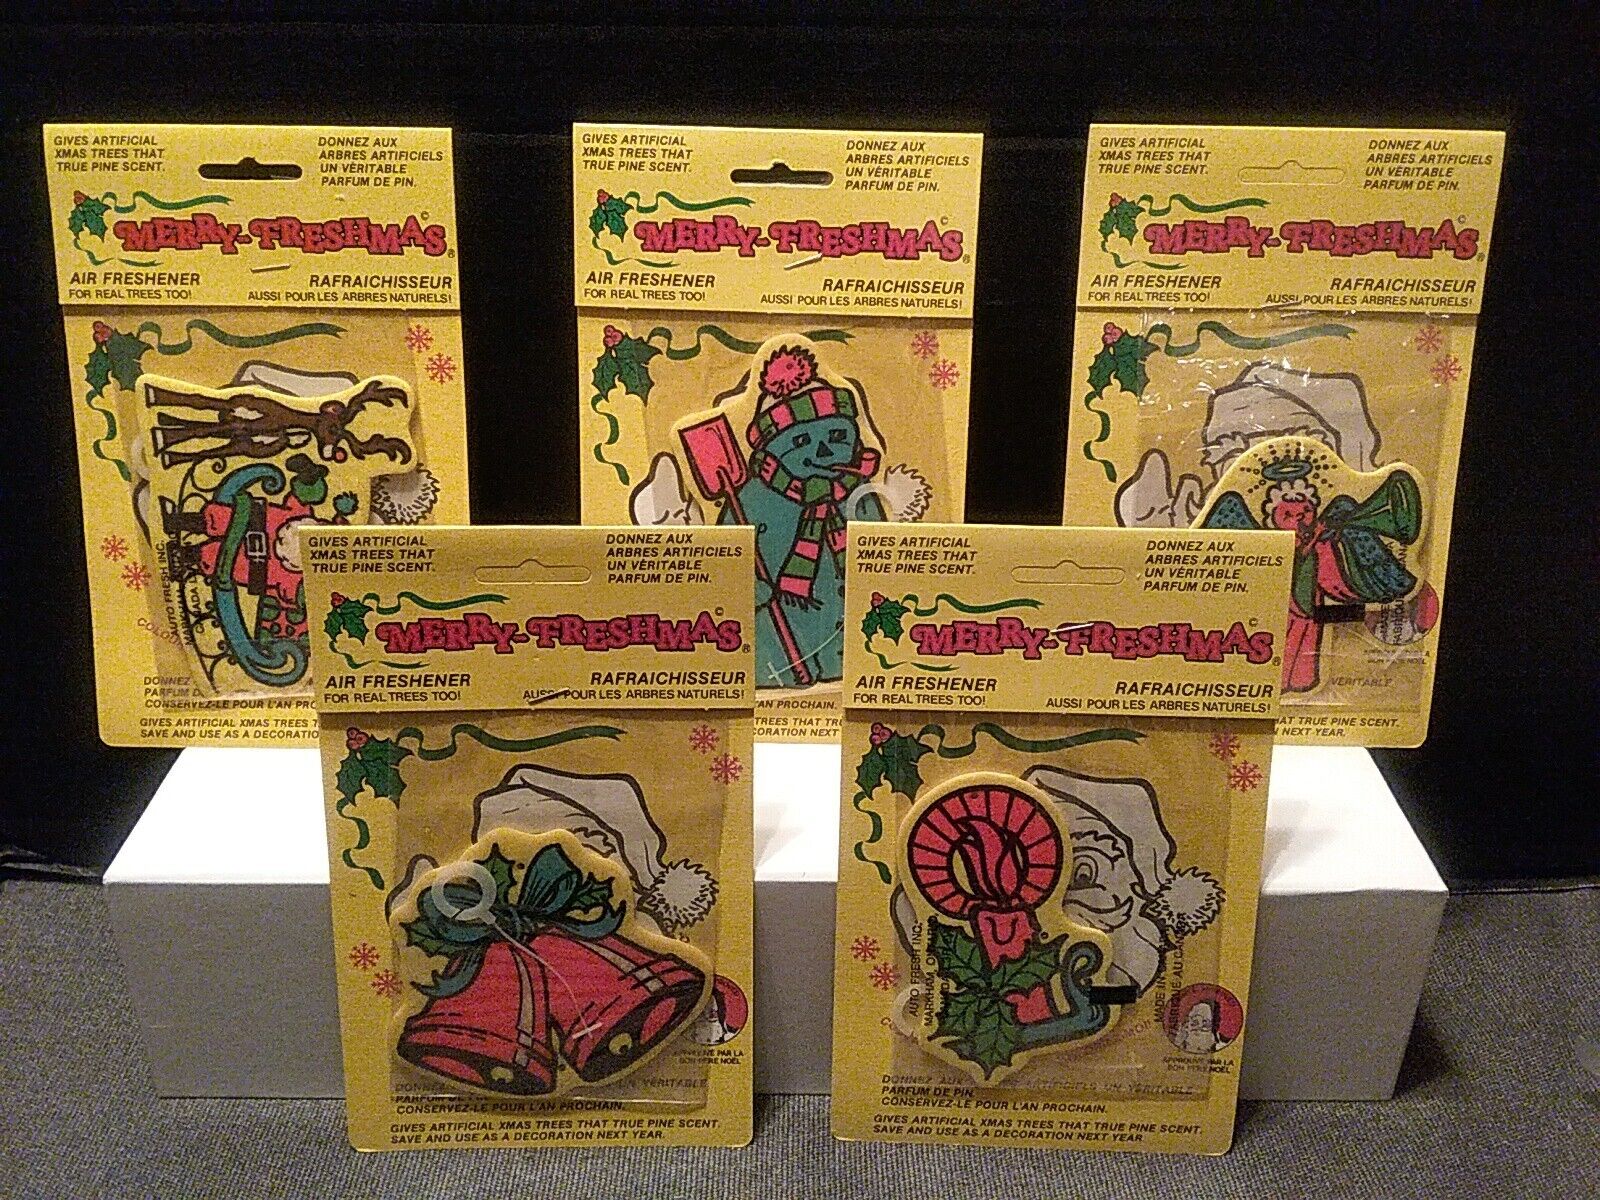 Vtg Merry-Freshmas Christmas Tree Highly Scented Air Fresheners&More 5 Designs